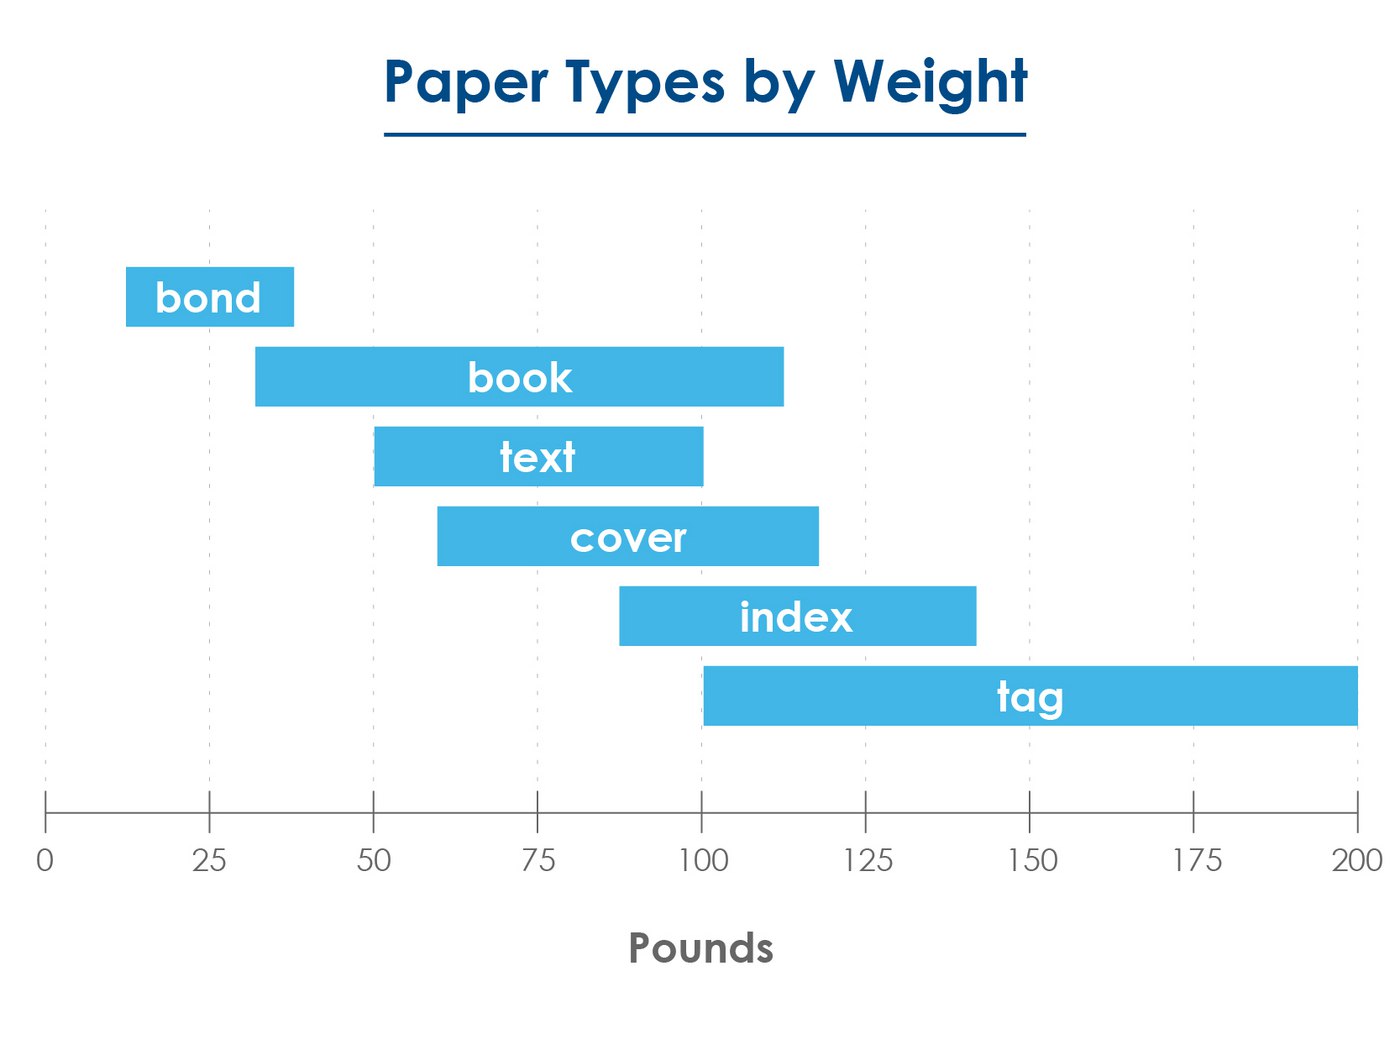 Paper-_the_devil_is_in_the_details-_How_to_choose_the_best_paper_for_your_printer,_to_get_top_quality_output-02